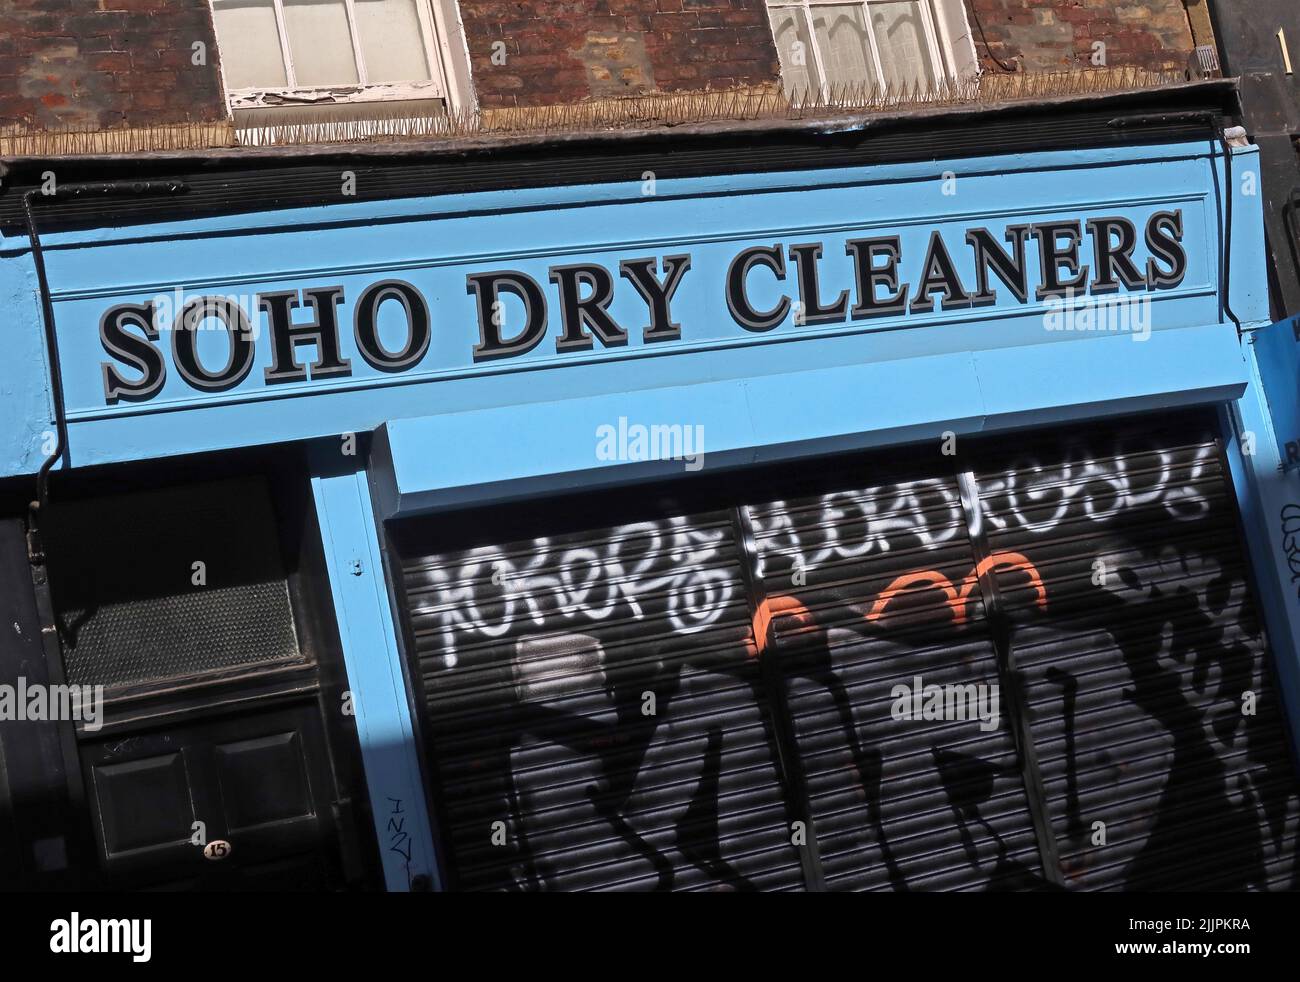 Soho Dry Cleaners Shop, 15 Berwick St, Londres, Angleterre, Royaume-Uni, W1F 0HP Banque D'Images